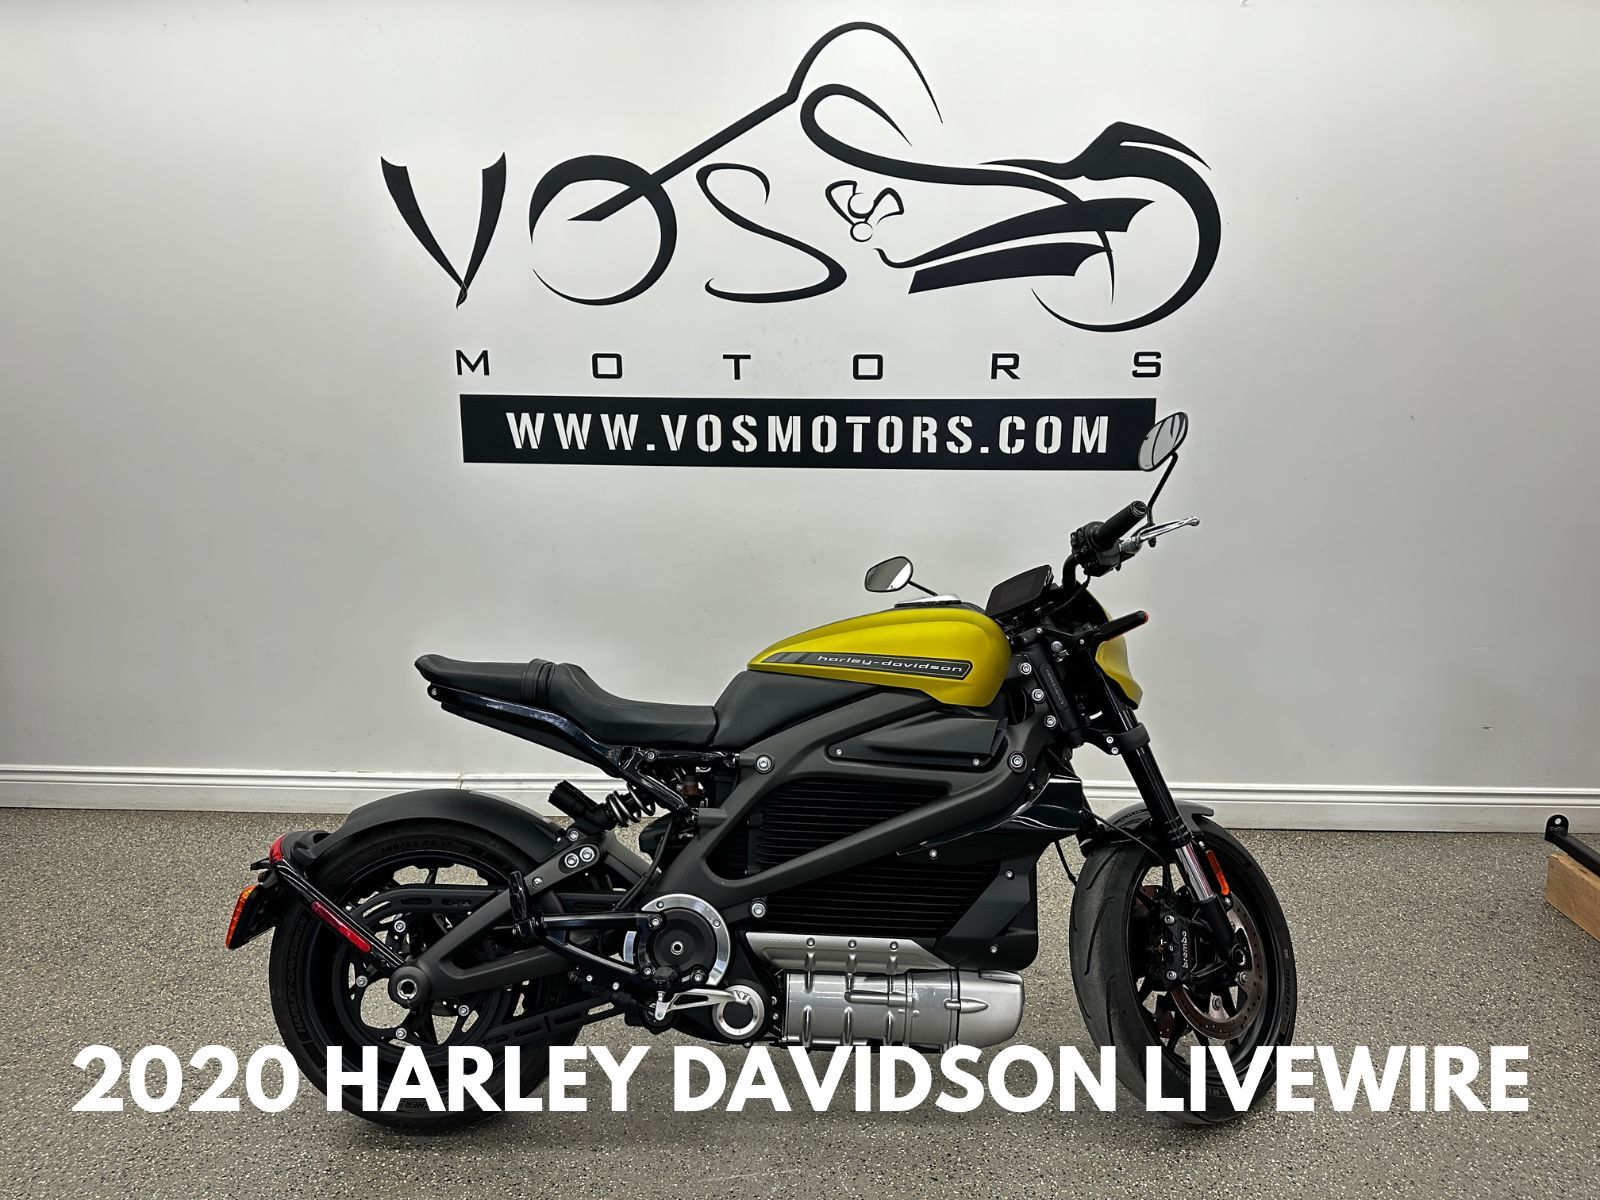 2020 Harley-Davidson LiveWire LiveWire ABS - V5715NP - -No Payments for 1 Year**